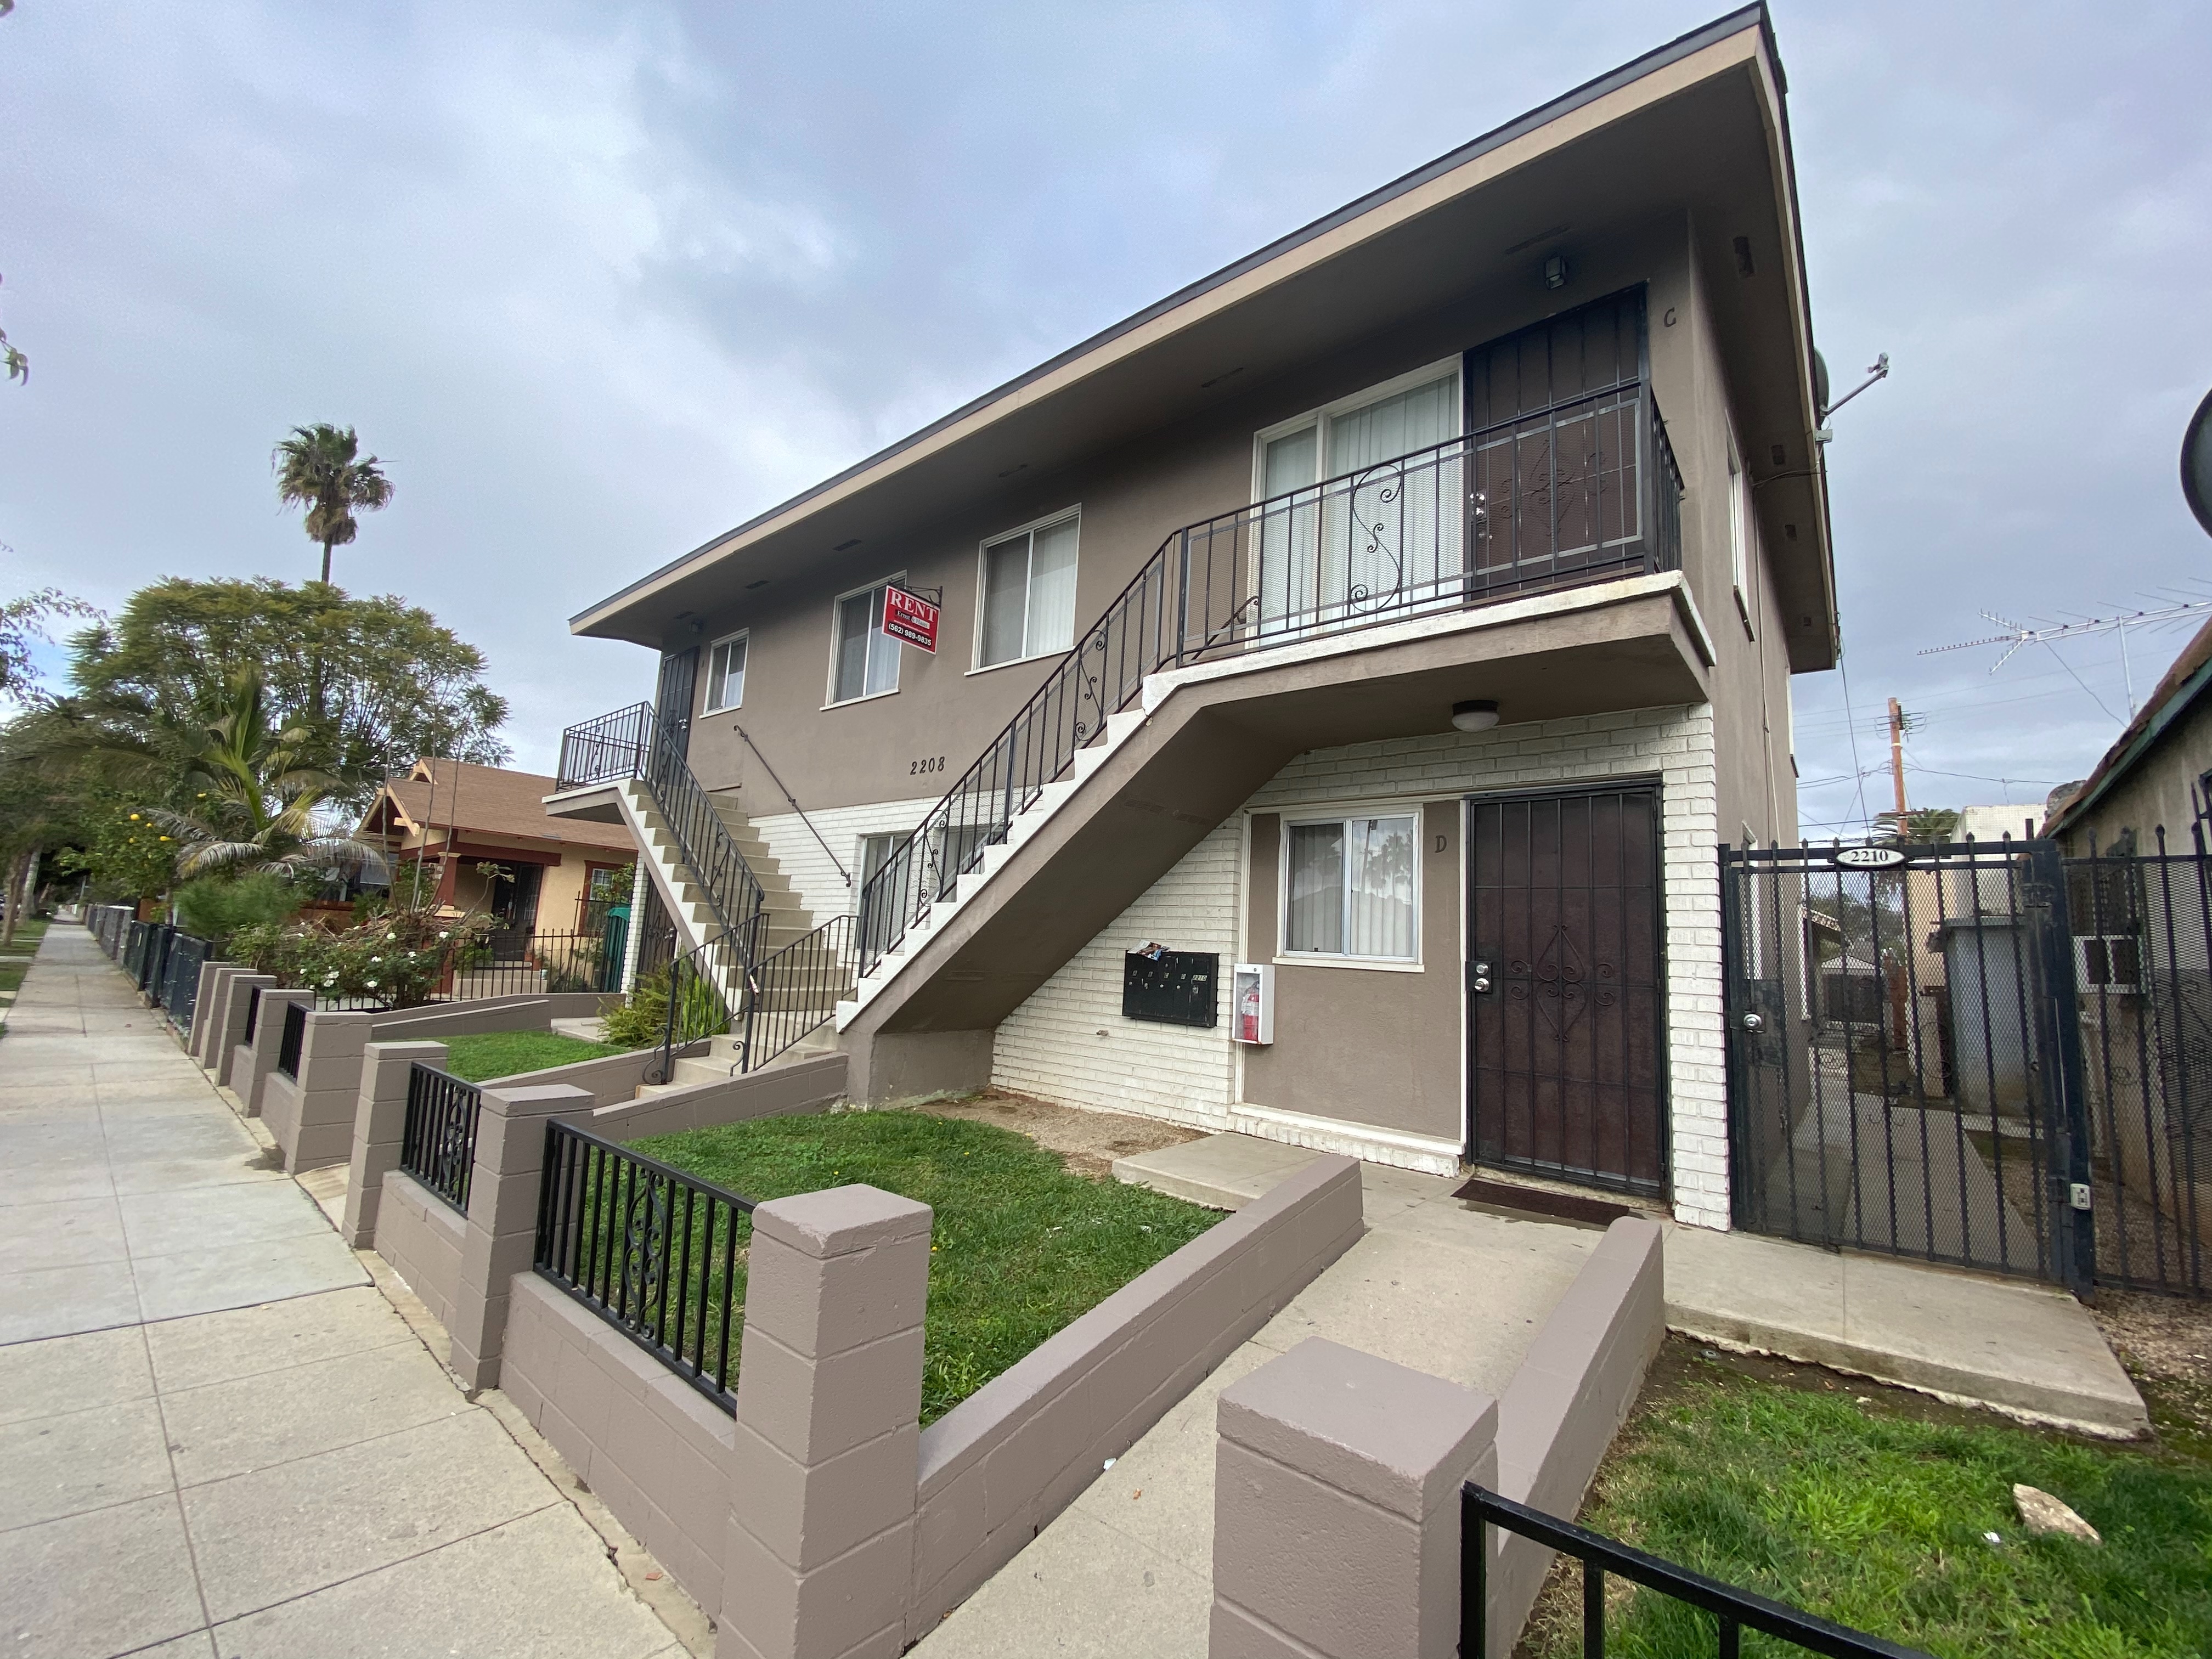 Property Listing For 03/05/21